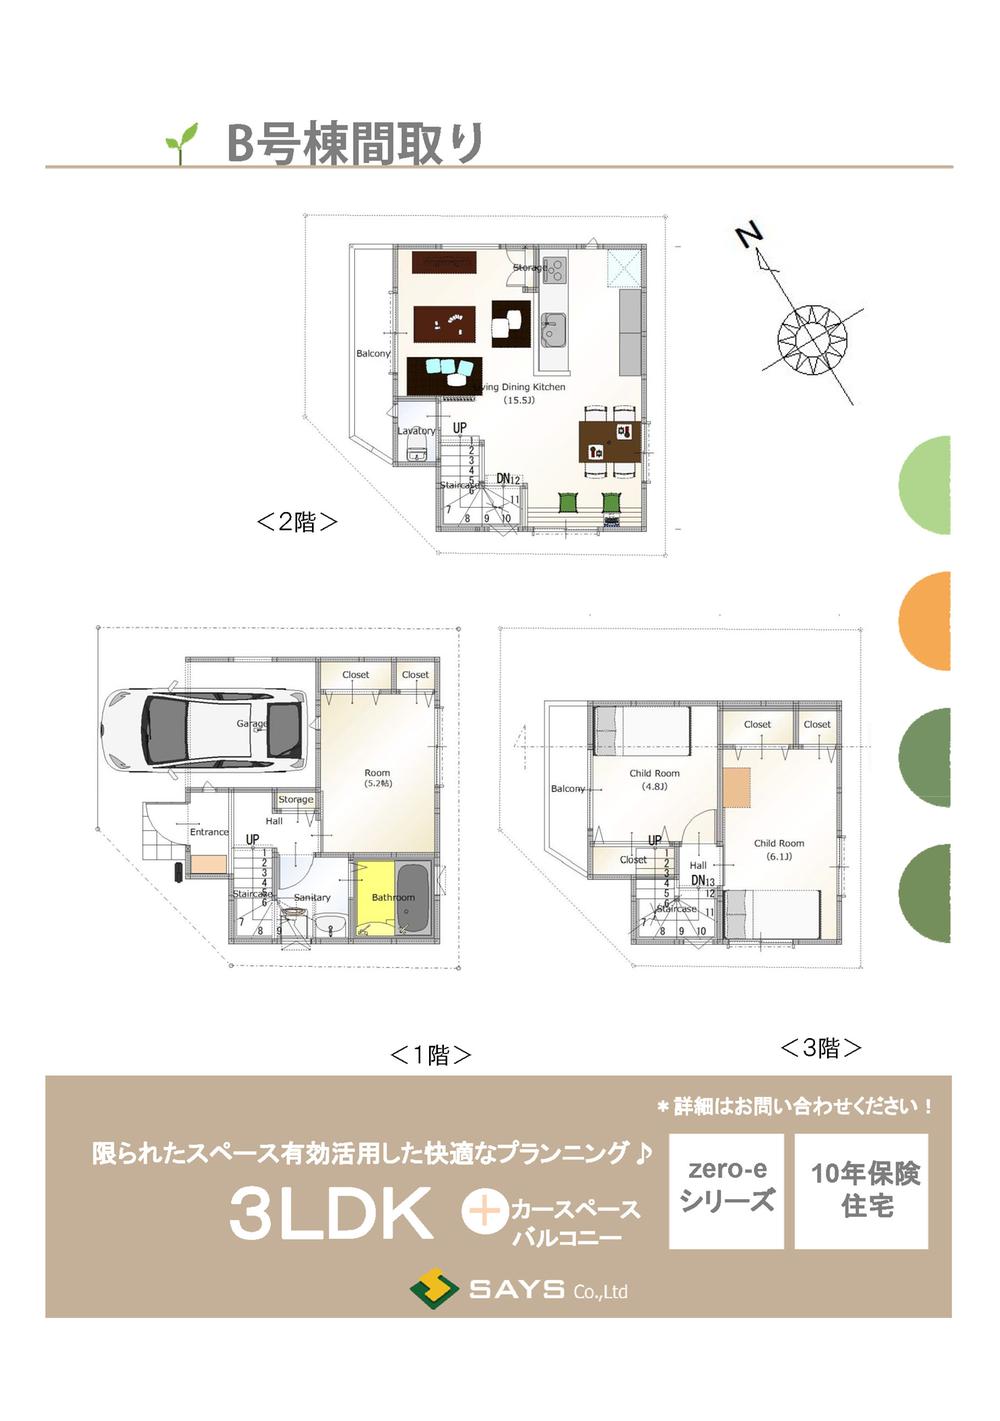 Floor plan. 39,800,000 yen, 3LDK, Land area 49.61 sq m , Such as more than a building area 84.34 sq m 15 Pledge spacious LDK and the firm provided the storage of each room is planning stuck to the "living Ease"!